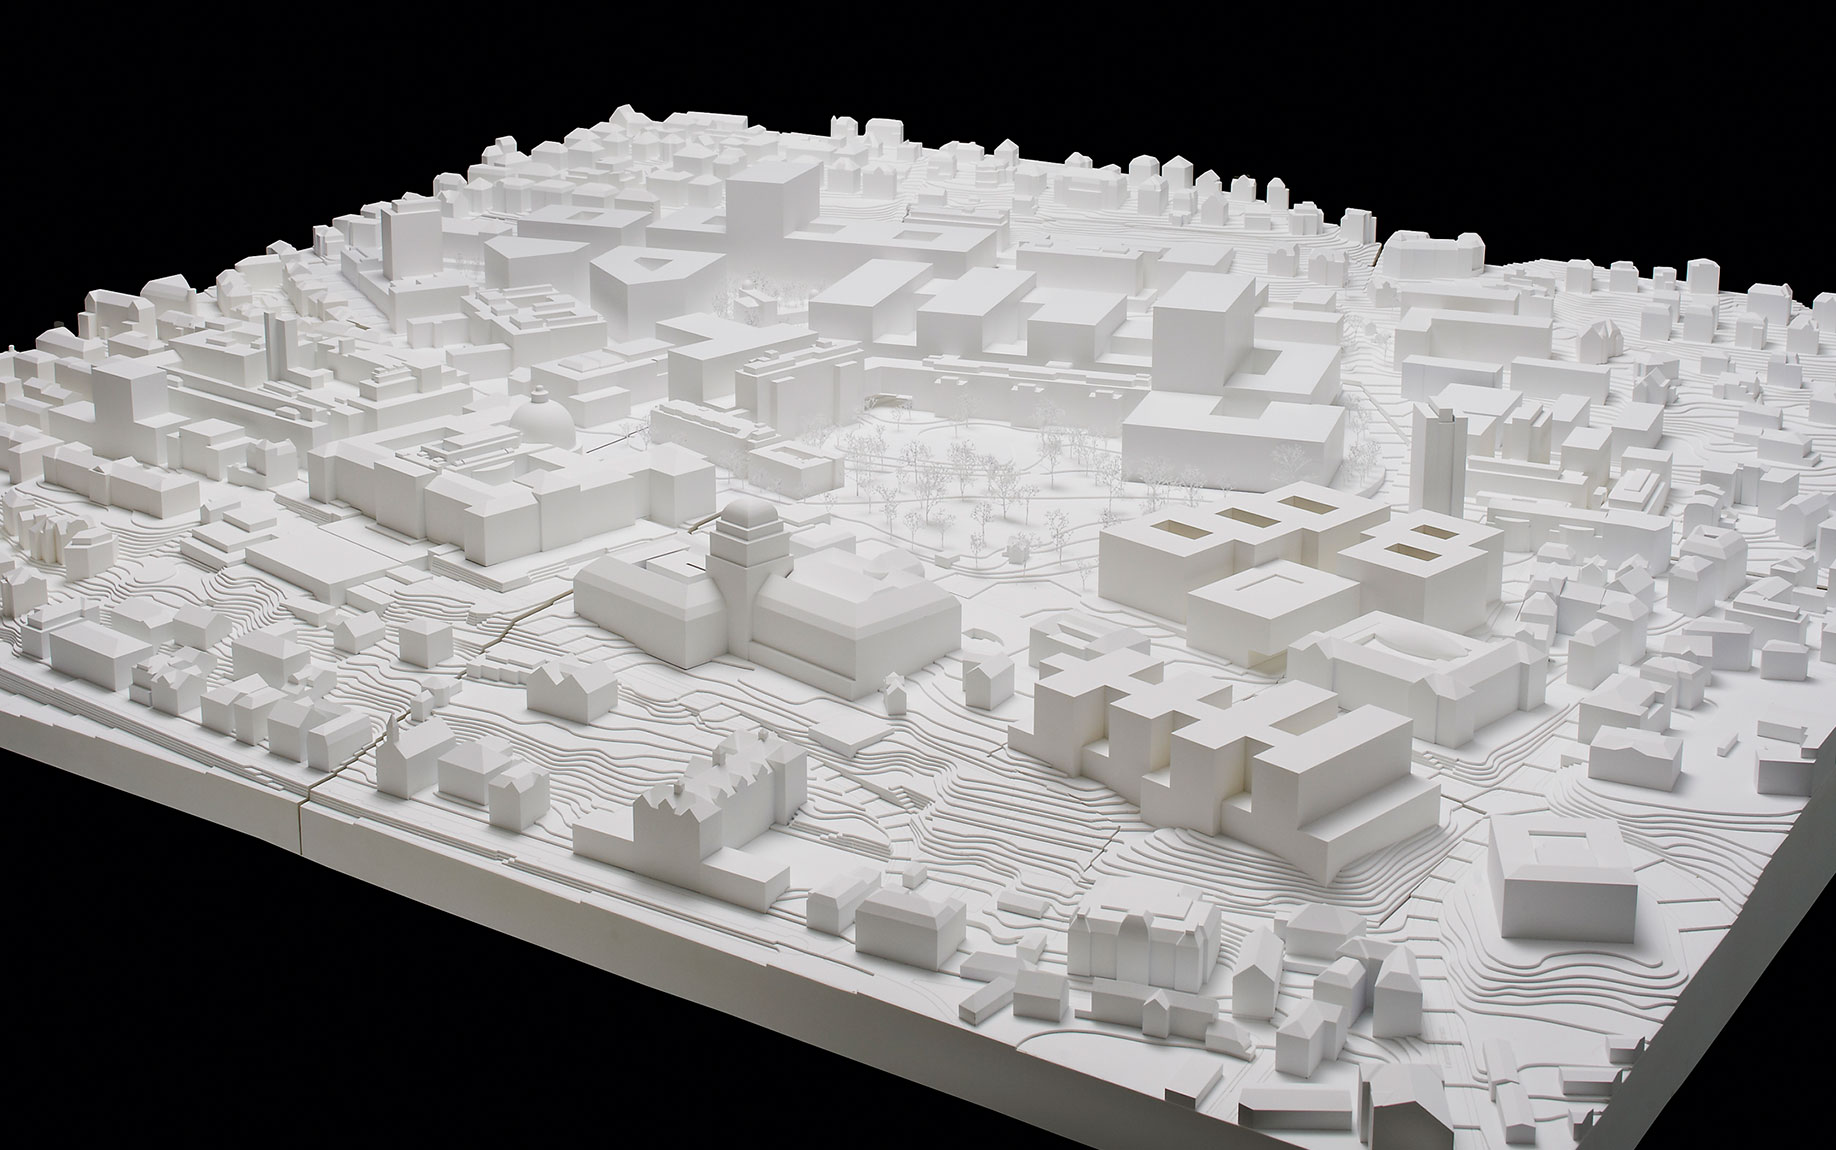 2015 – UZH as an architect. (Pictured: A model for a future City Campus)